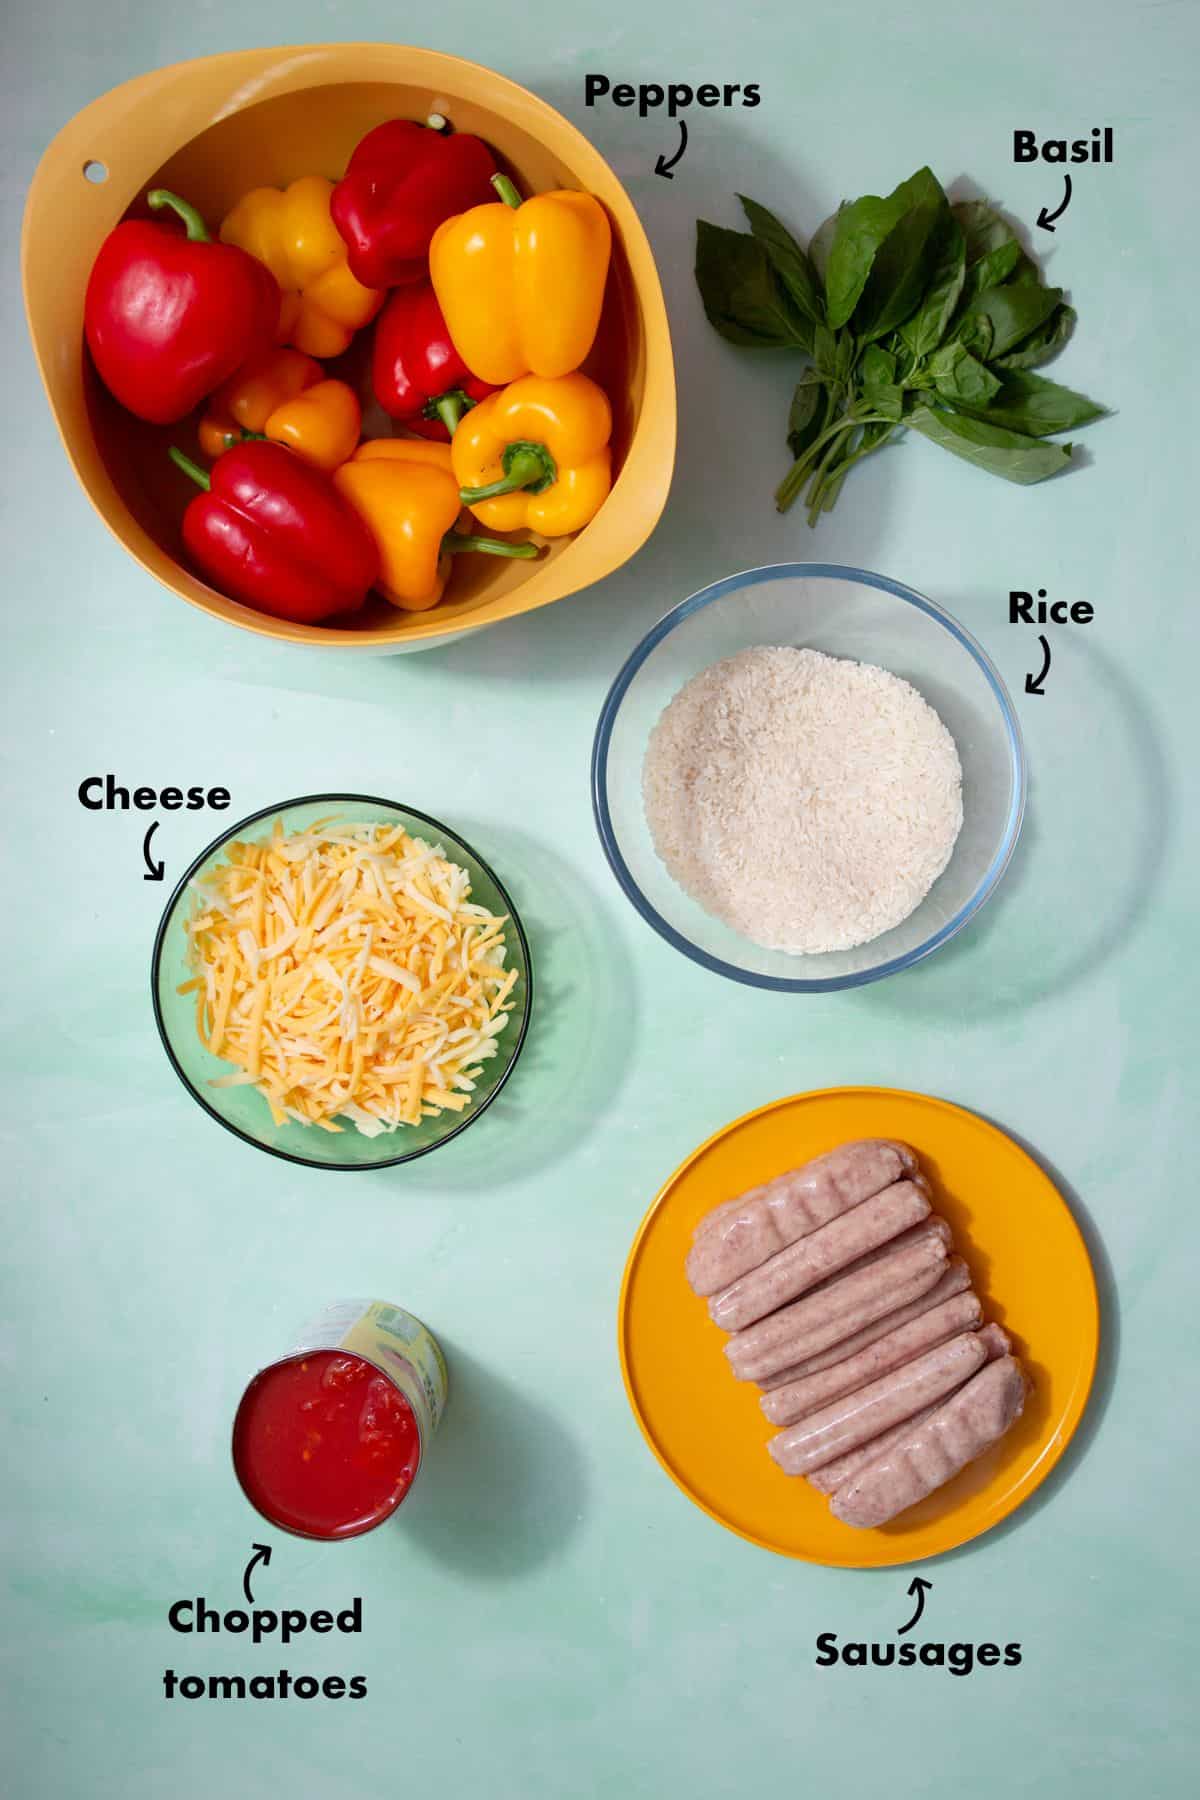 Ingredients to make stuffed peppers laid out on a pale blue background and labelled.